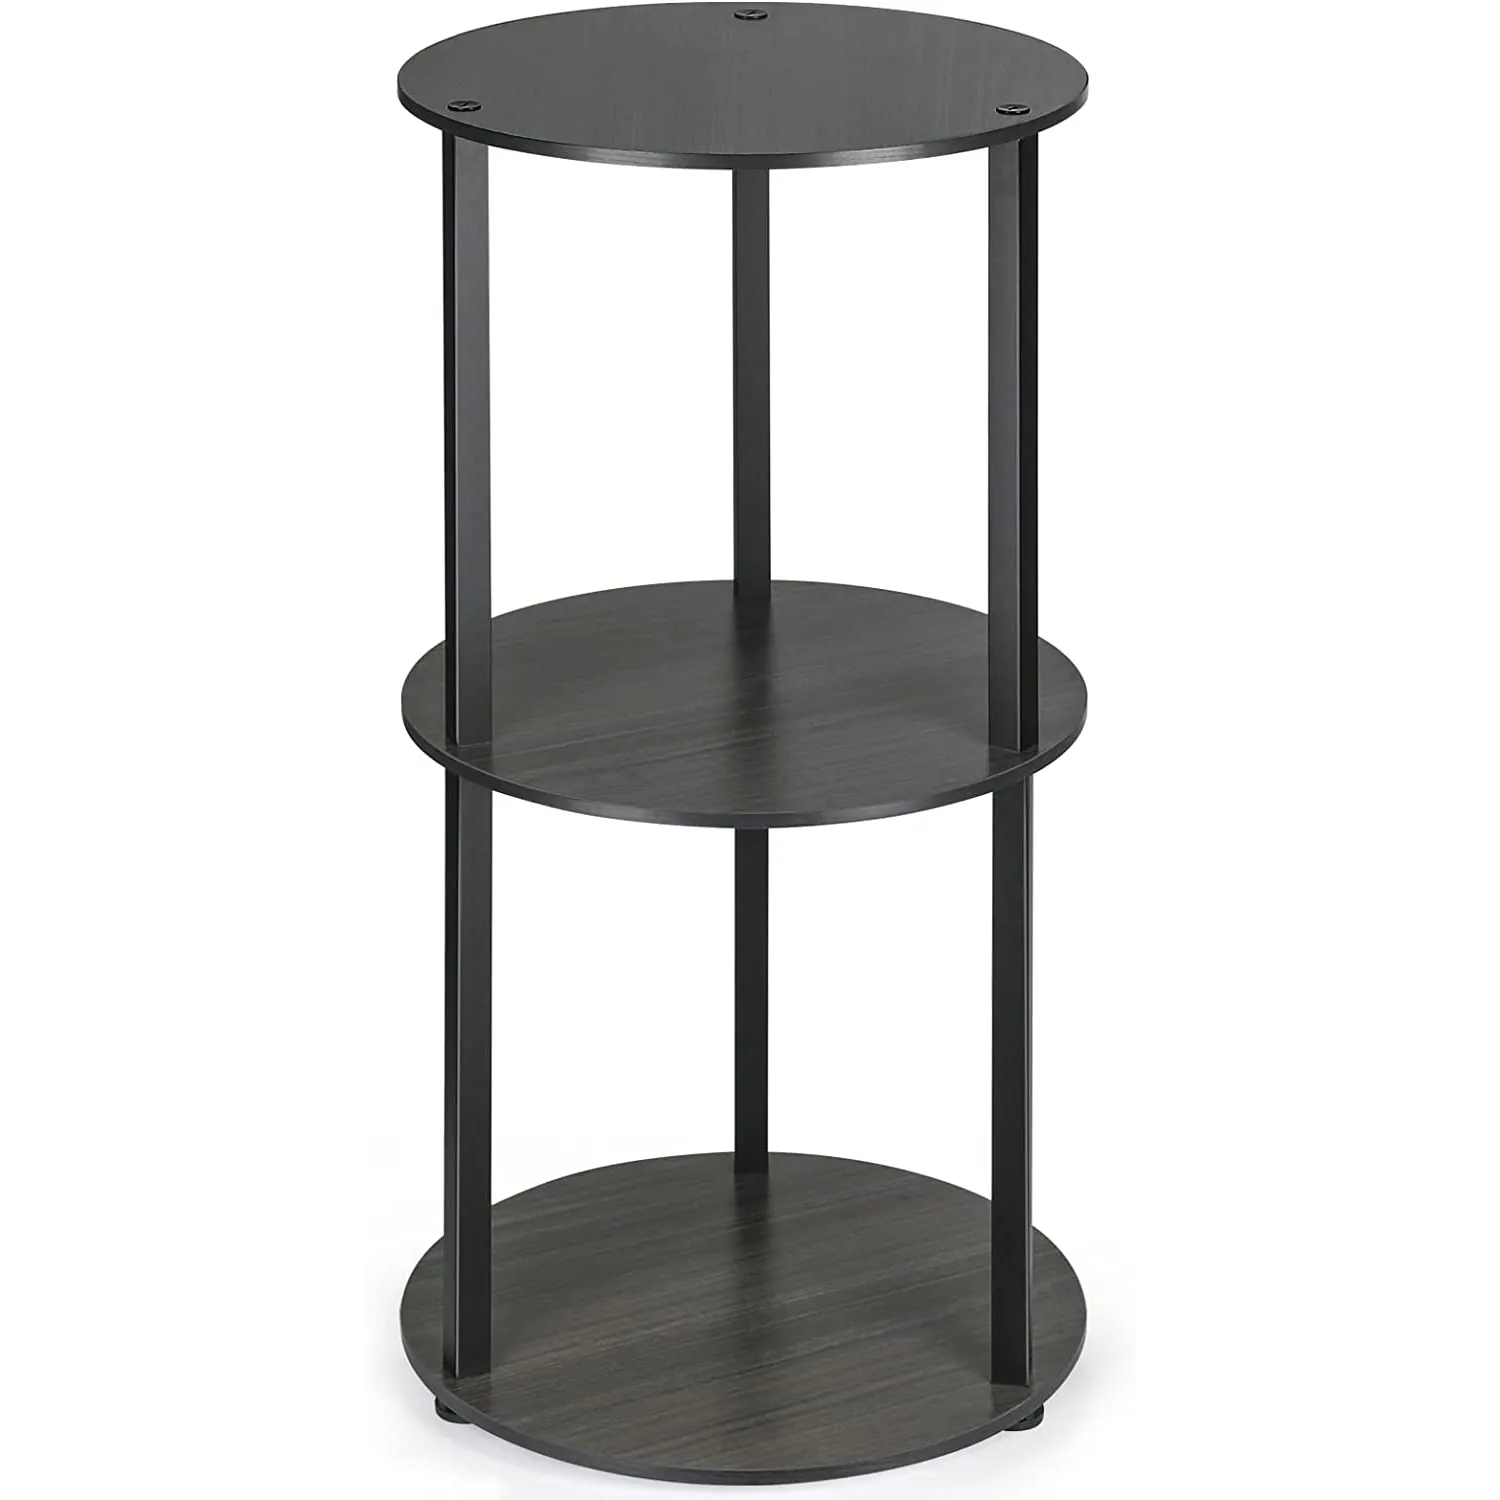 Midnight Classic 3-Tier Round Wooden Side Table black wood antique designer side table luxury home furniture bedroom tables